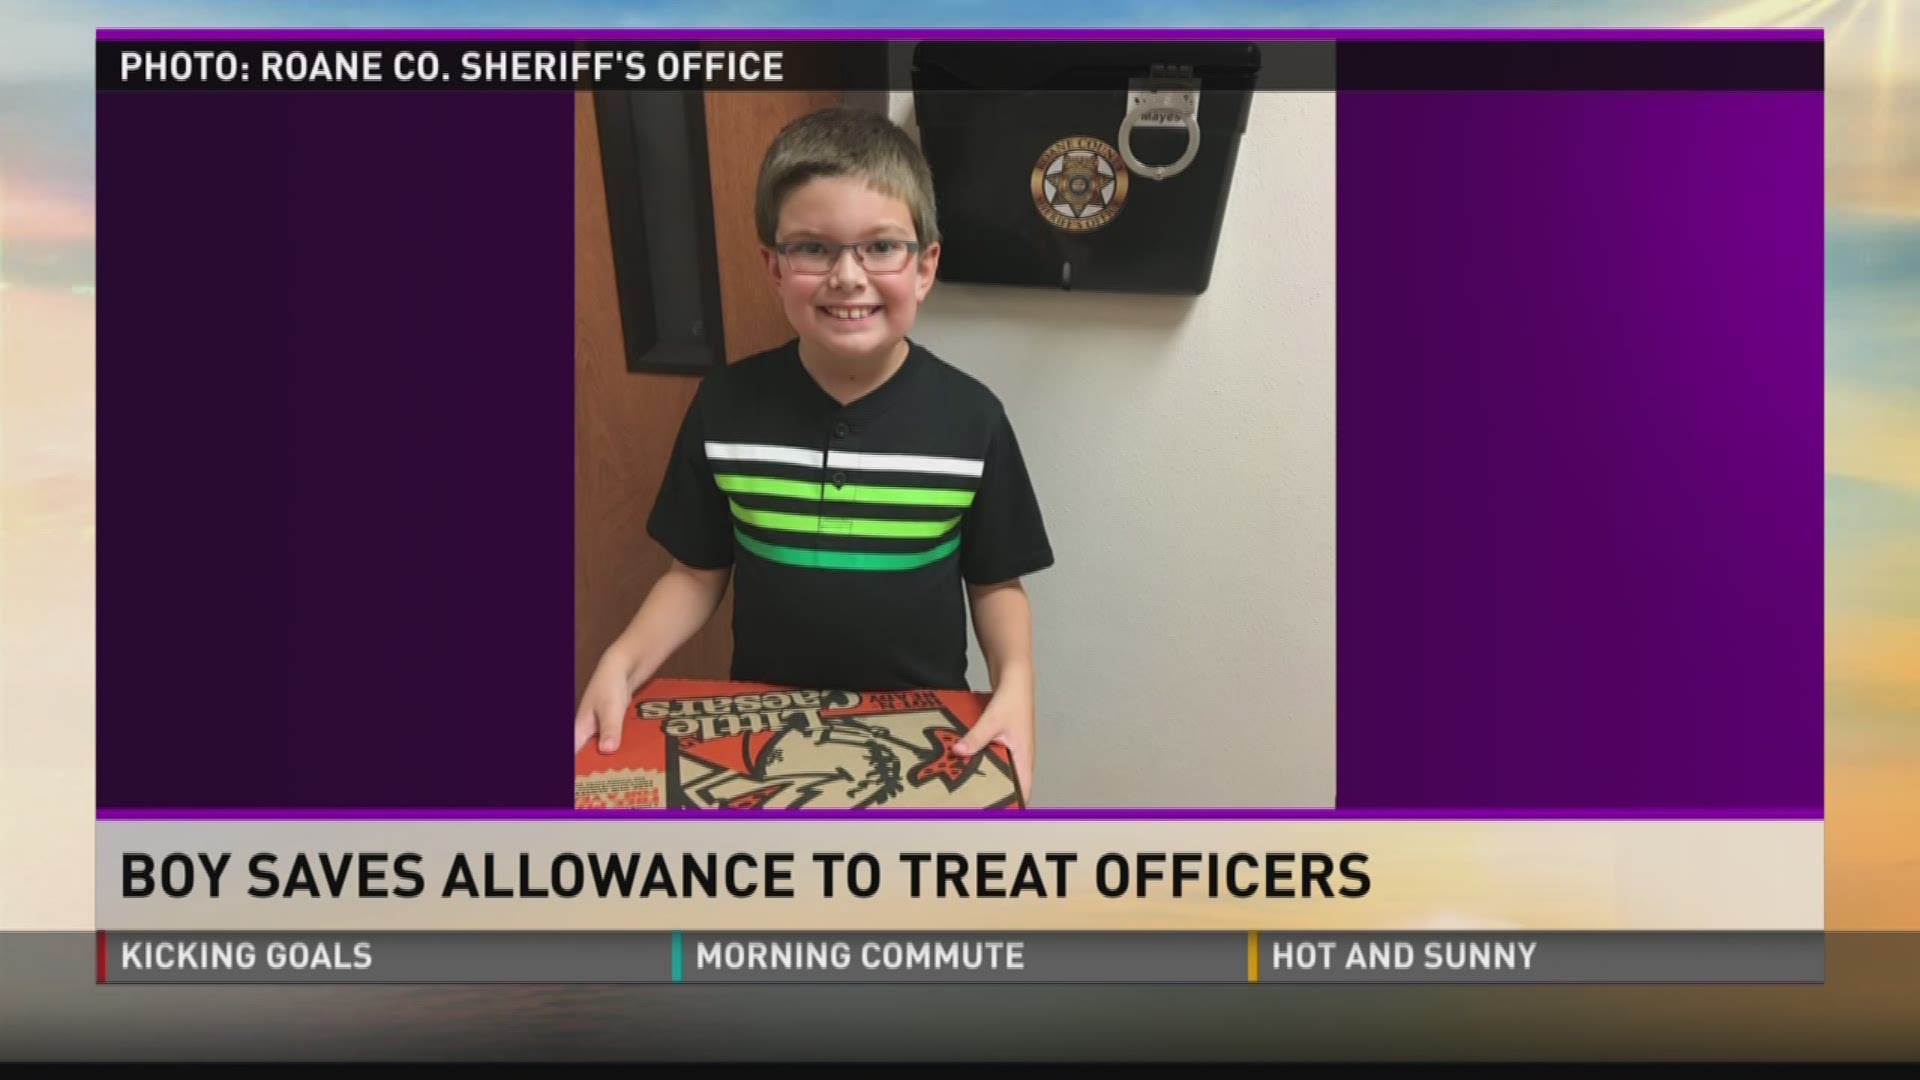 A little boy saved his allowance money to buy pizzas and treats for the Roane County Sheriff's Office.